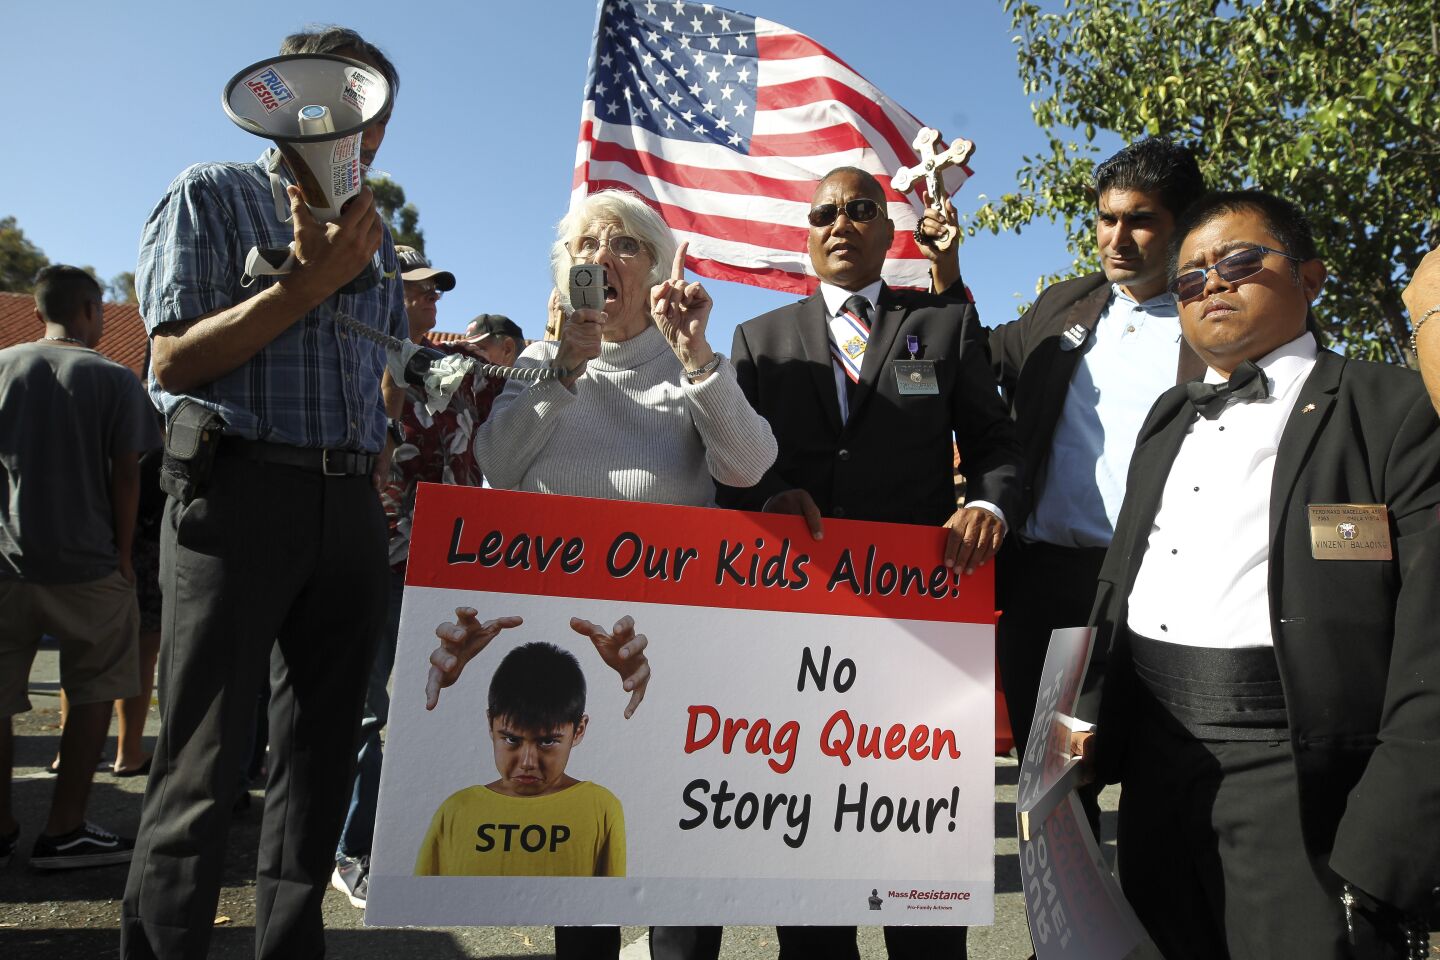 Karen Grube speaks to other protesters against the Drag Queen Story Hour at the Chula Vista Public Library Civic Center Branch on Tuesday, September 10, 2019 in Chula Vista, California.